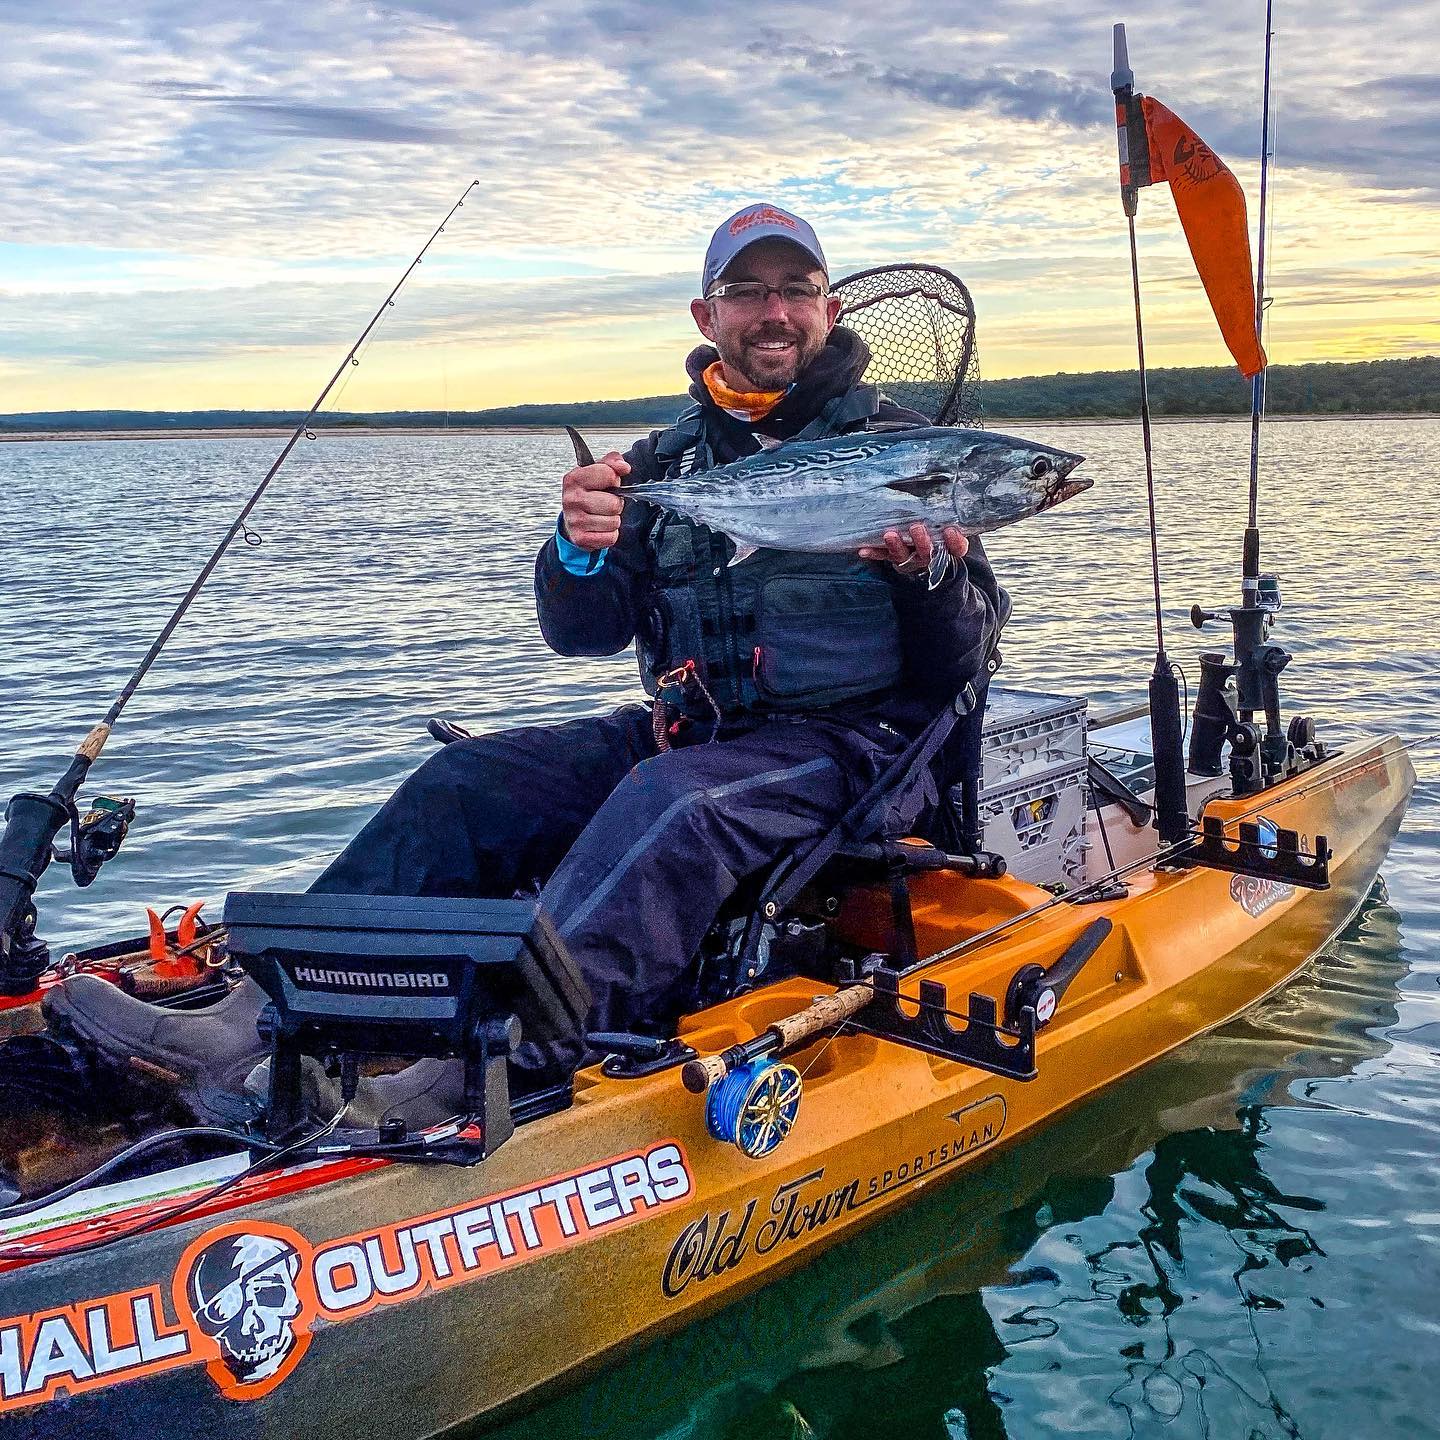 Selecting a Battery for a Motorized Kayak: Type, Capacity, and Life